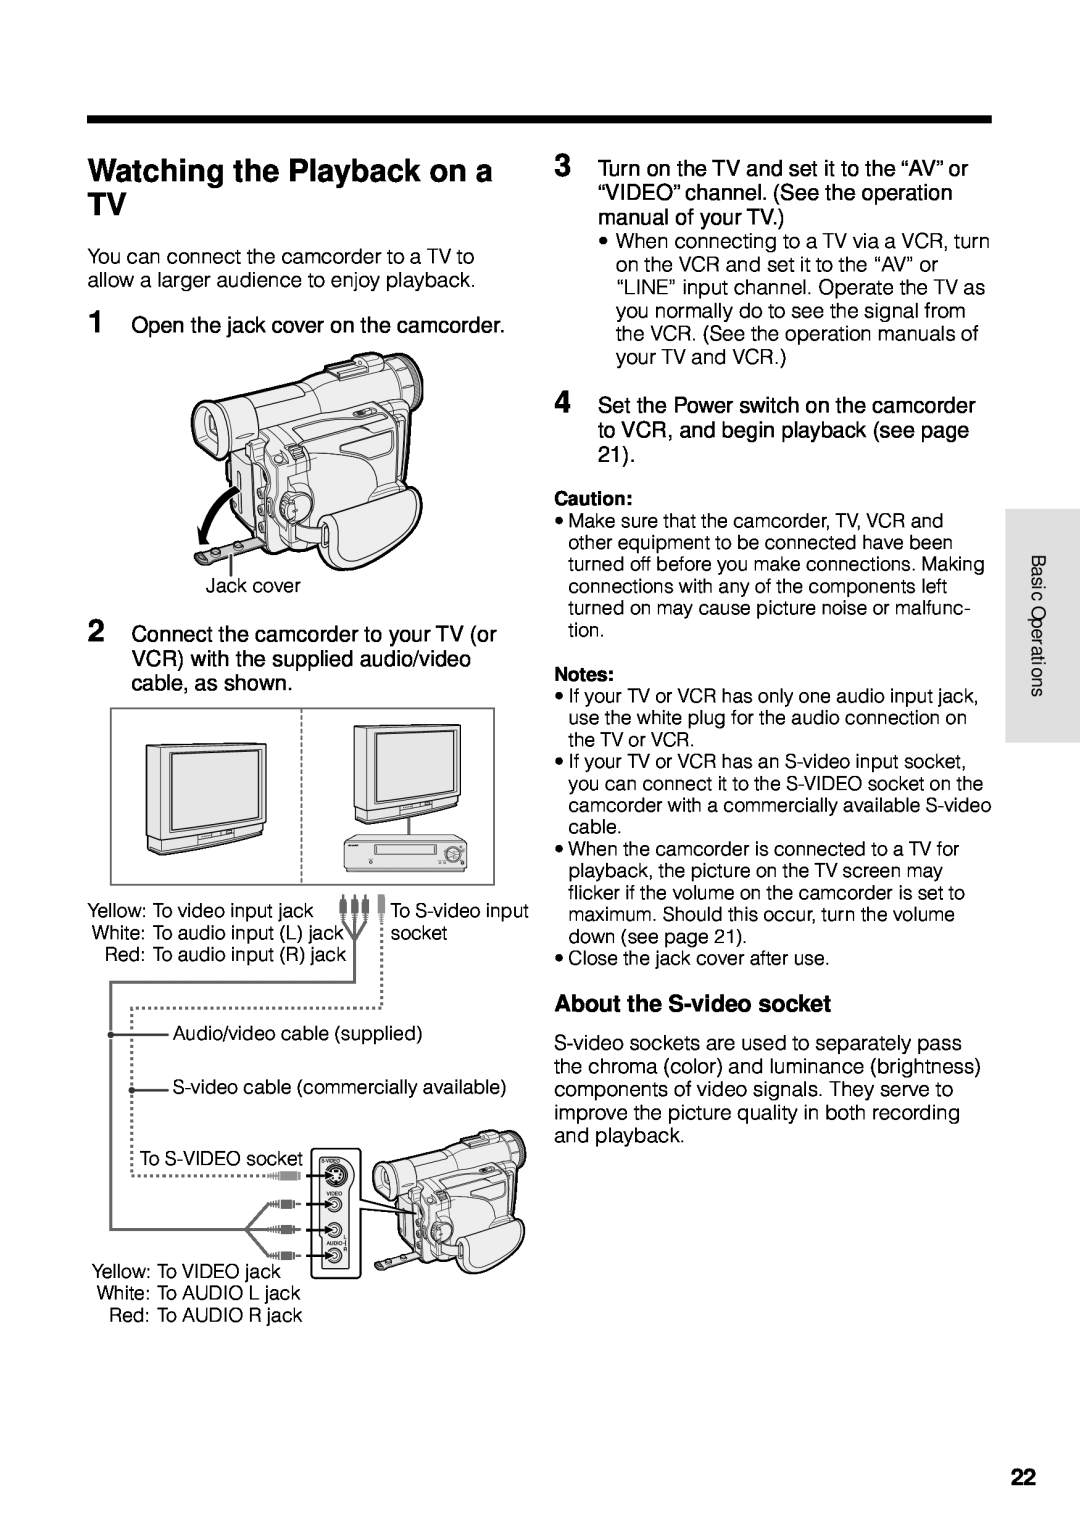 Sharp VL-WD250U operation manual Watching the Playback on a TV, About the S-video socket, Basic Operations 